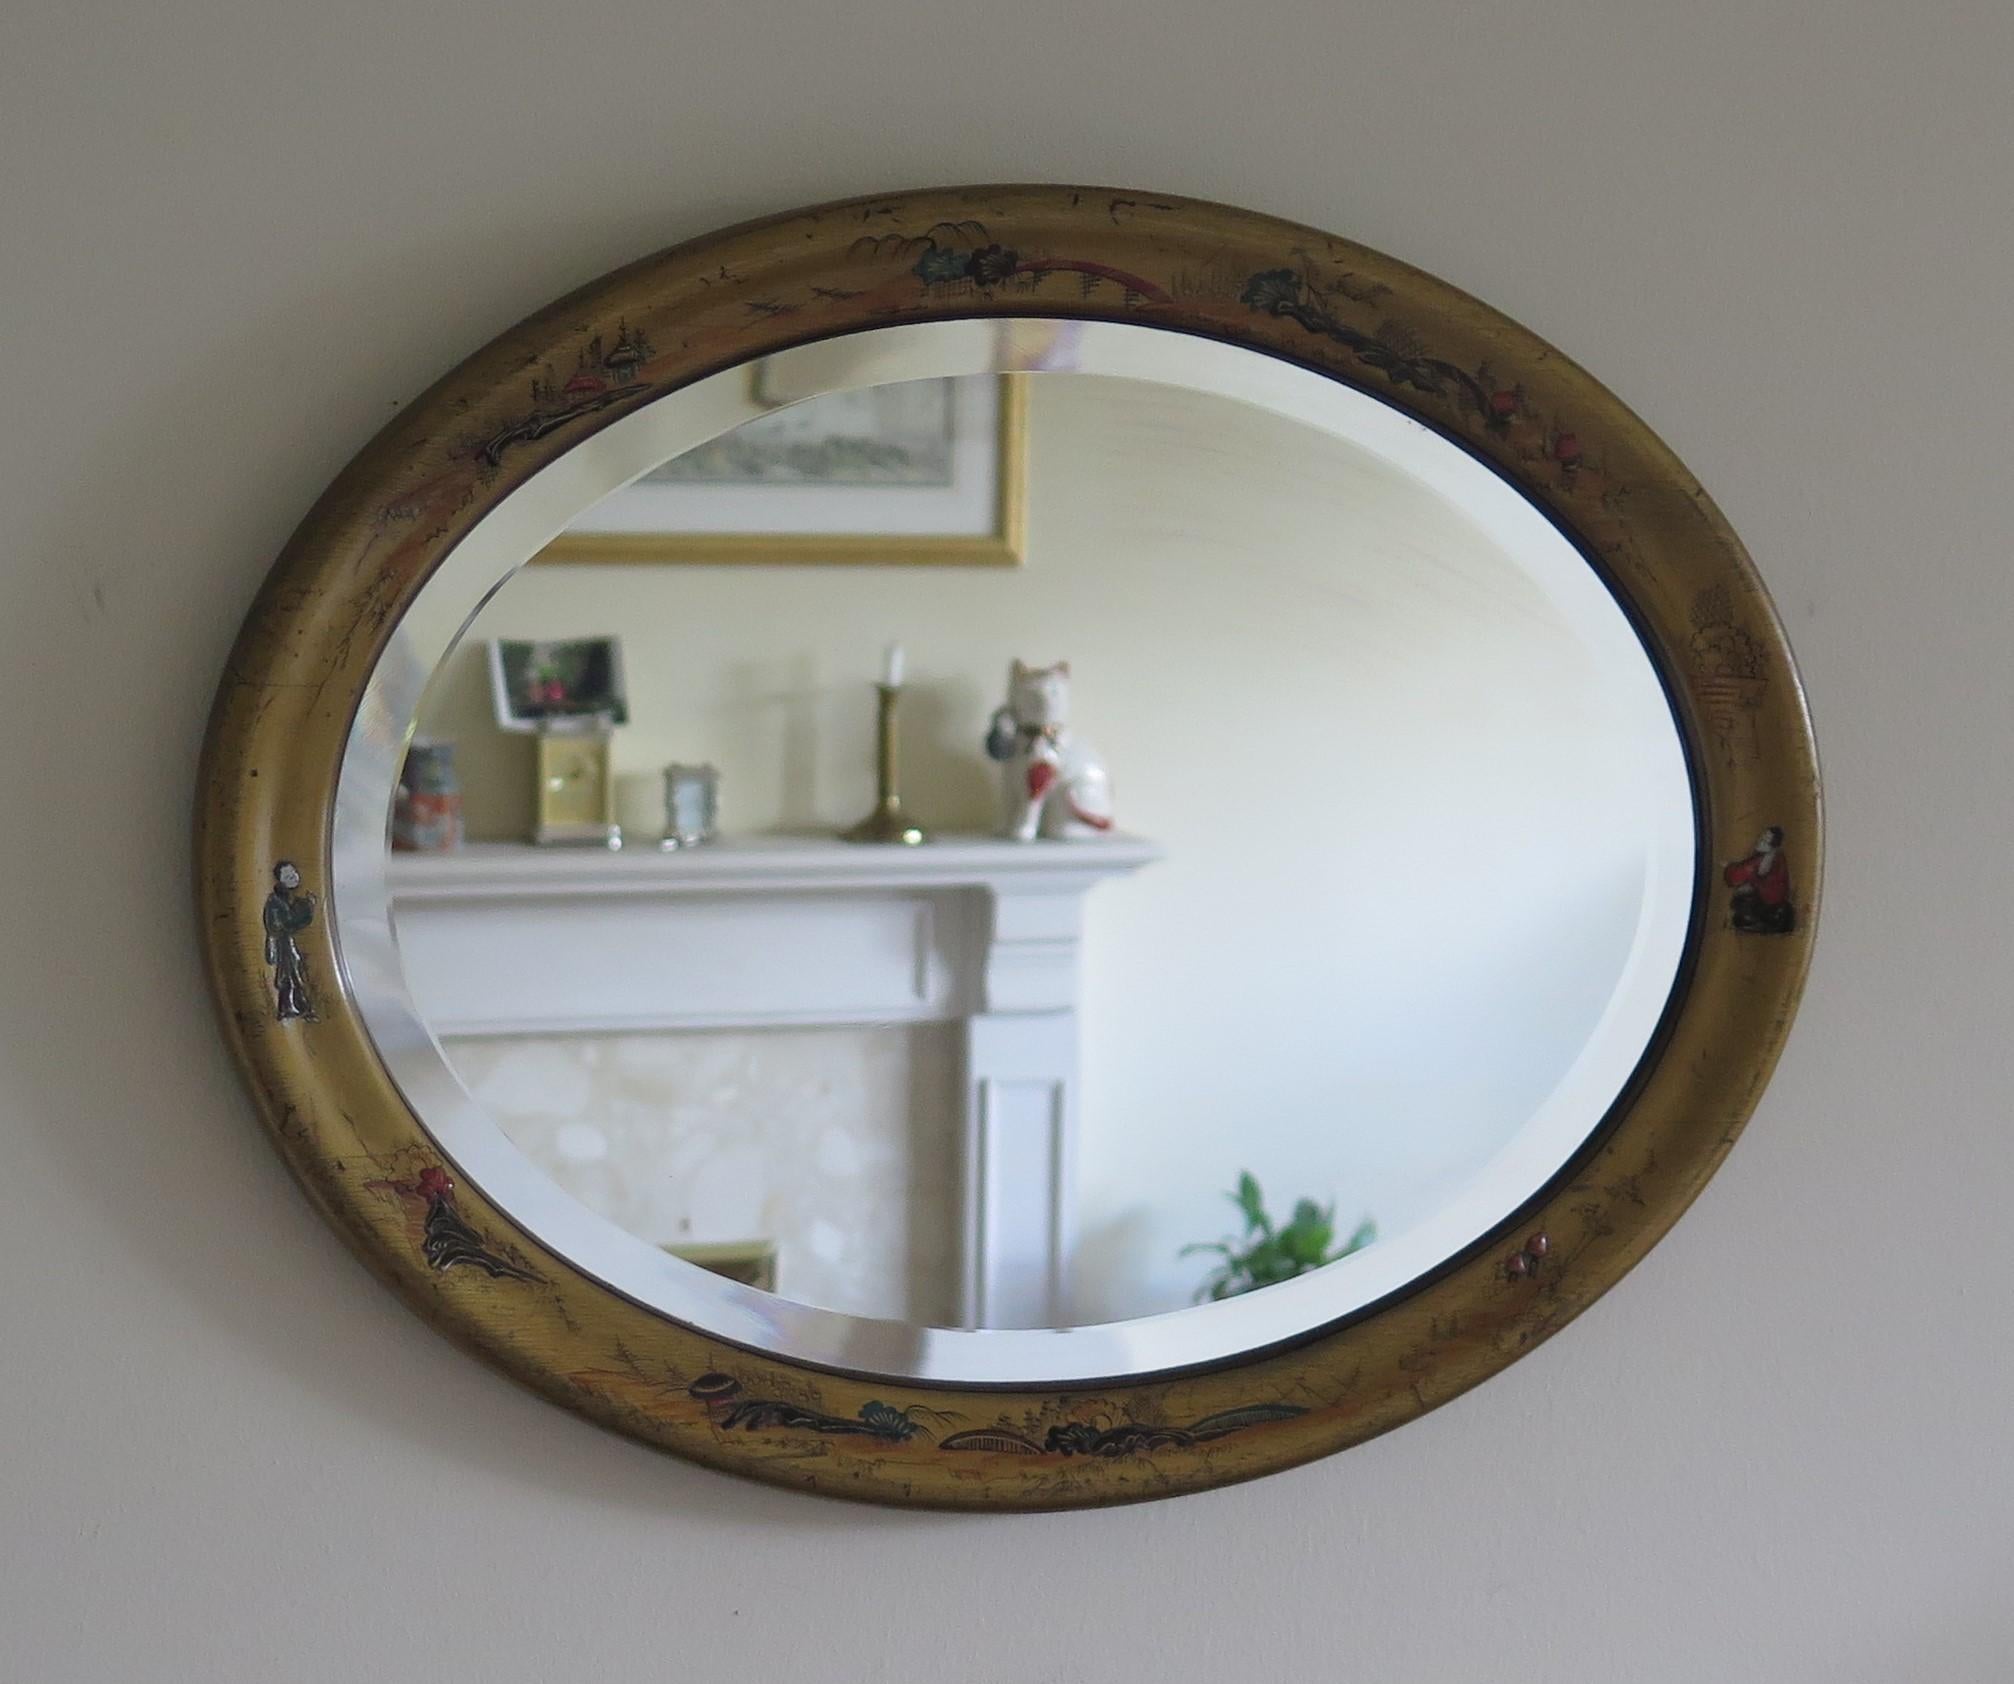 20th Century Oval Edwardian Gilt Chinoiserie Wall Mirror Bevelled Glass, English circa 1900 For Sale